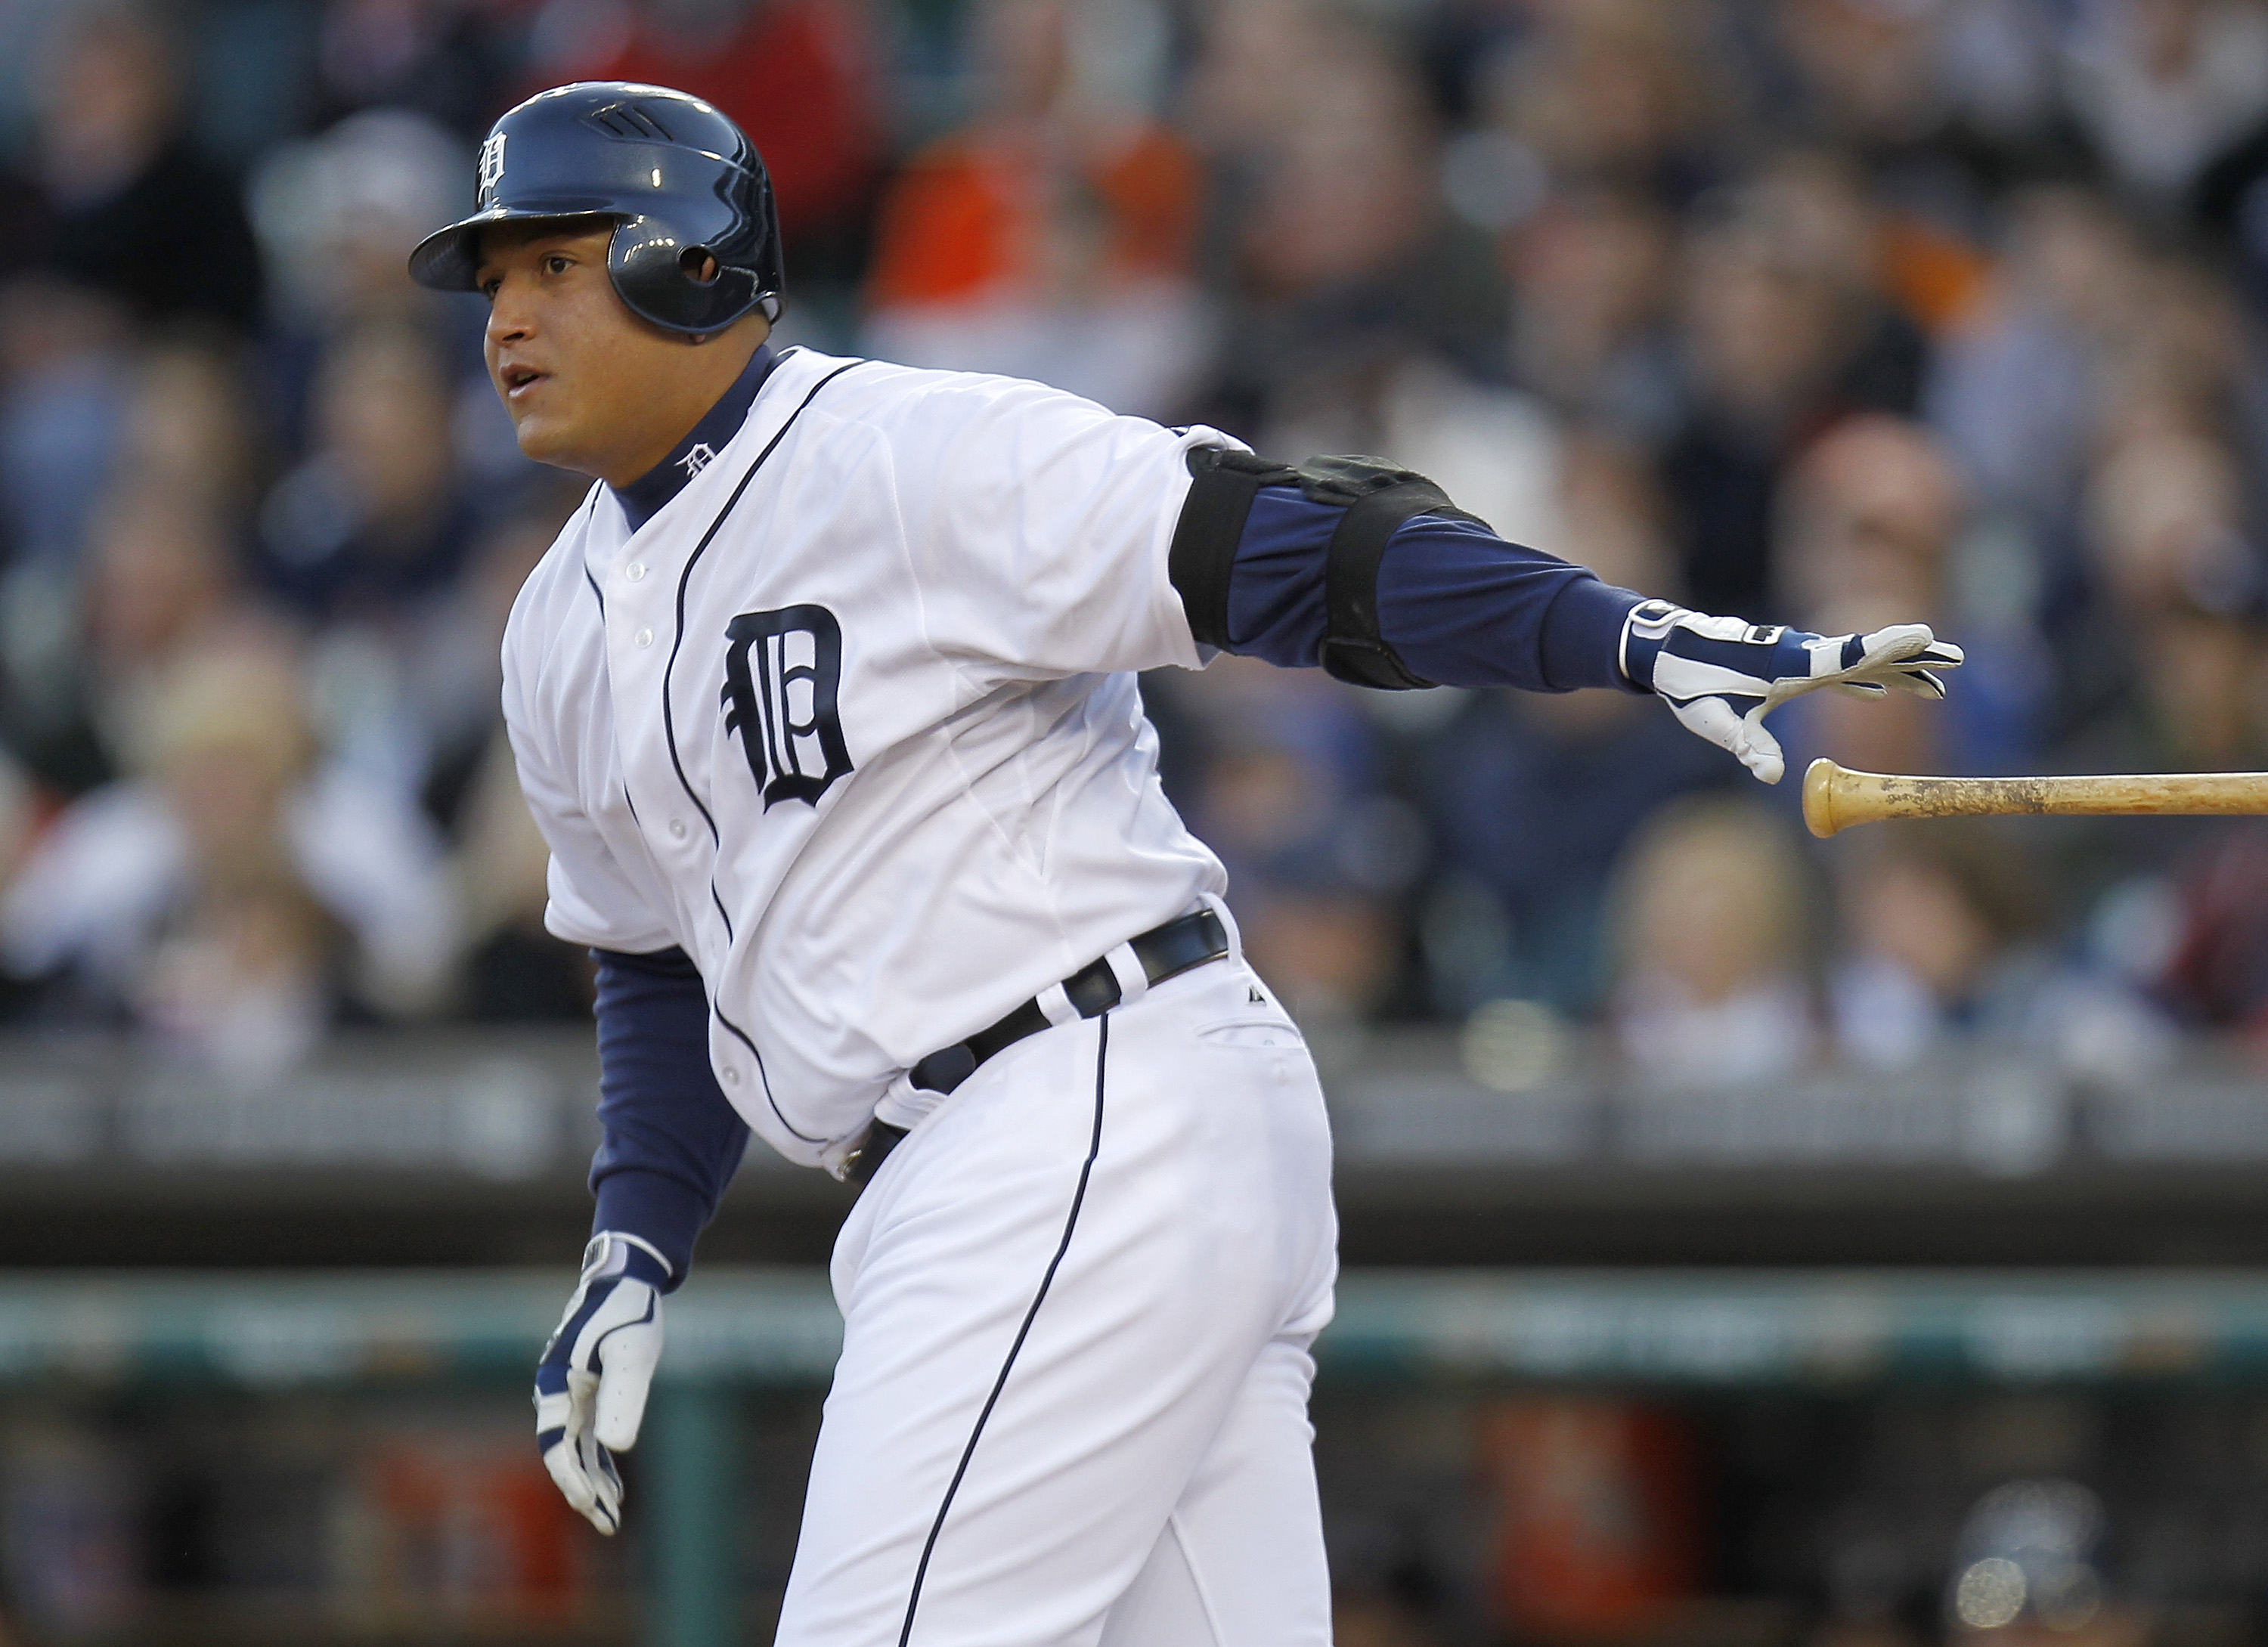 DETROIT, MI - MAY 04: Miguel Cabrera #24 of the Detroit Tigers watches a double that scores a run in the third inning while playing the New York Yankees at Comerica Park on May 4, 2011 in Detroit, Michigan. Detroit won the game 4-0. (Photo by Gregory Sham